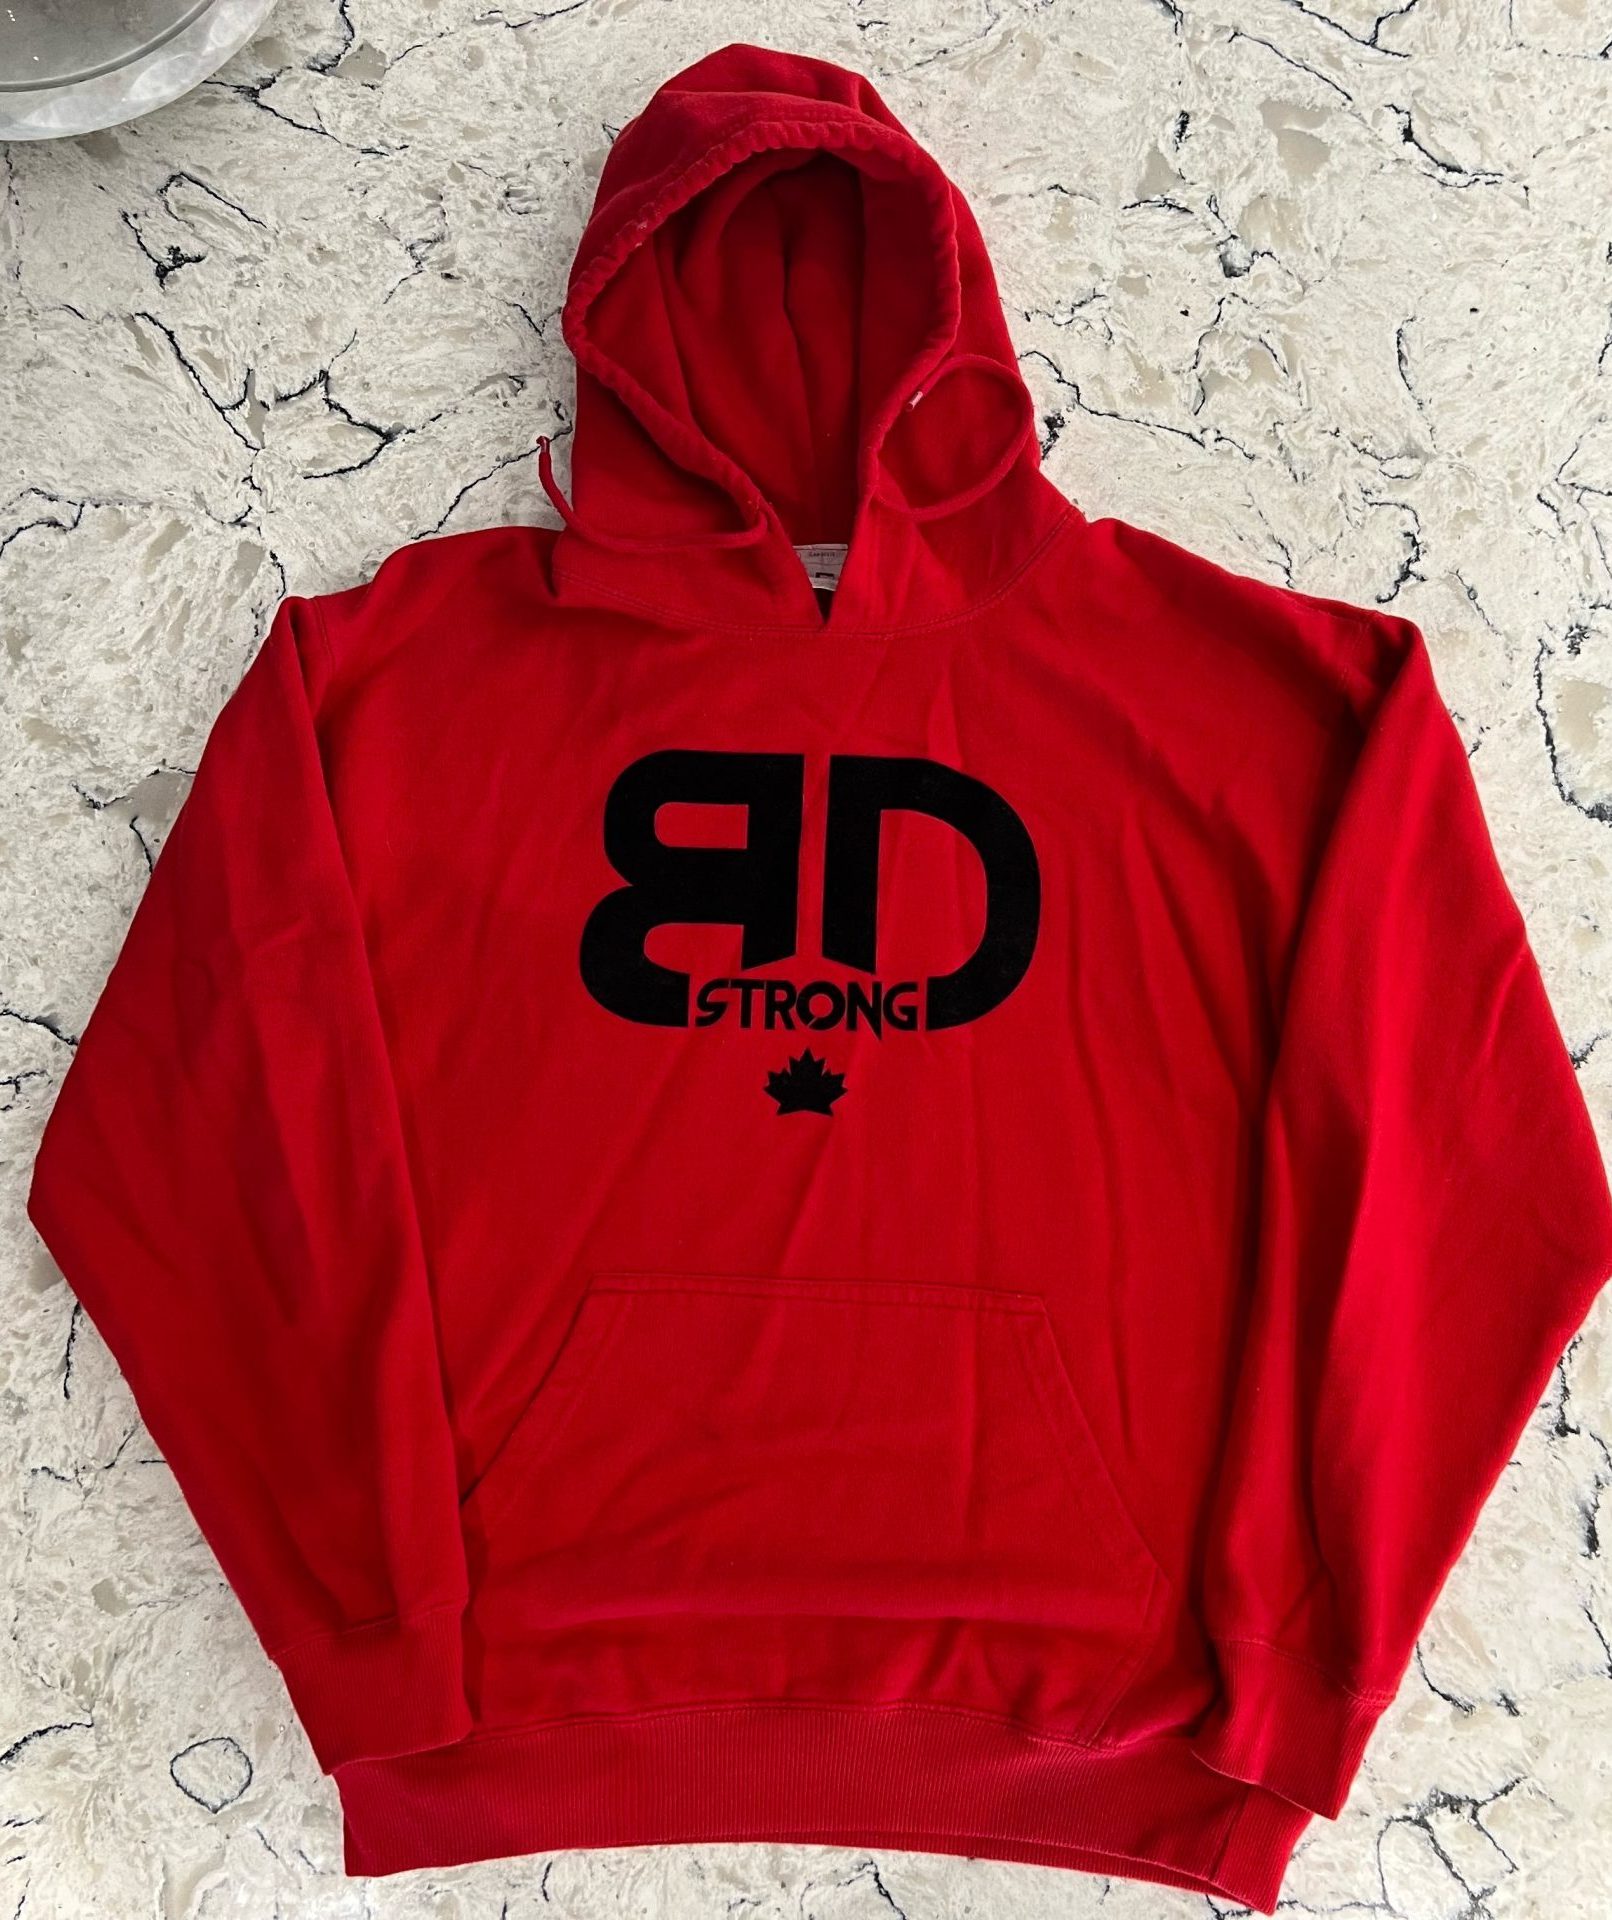 BD Strong - Red Hoodie - Burlington Dads